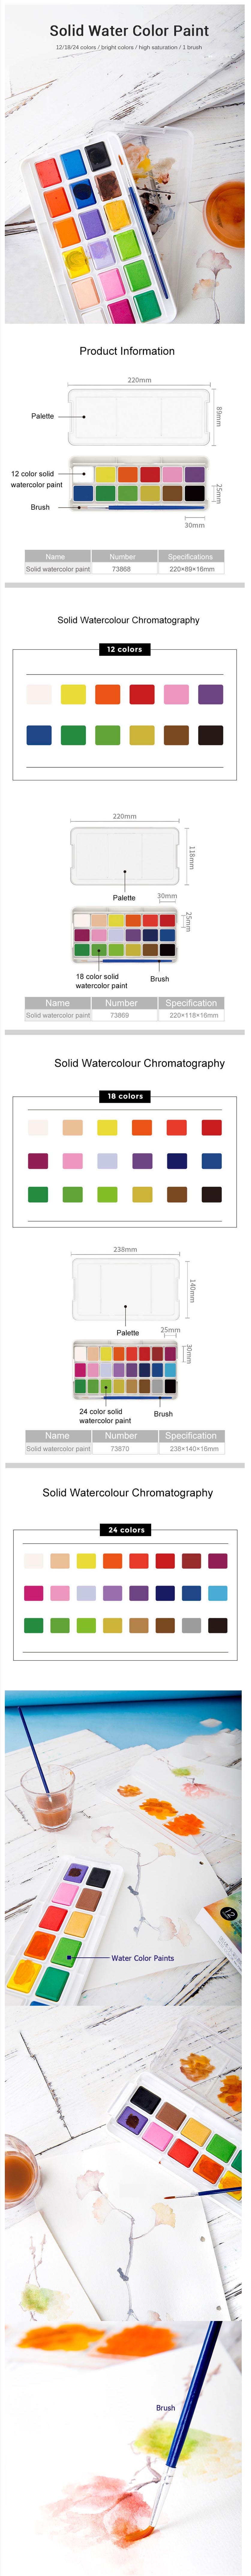 Deli-73870-24-Colors-Solid-Water-Color-Pigment-Set-Portable-Hand-painted-Watercolor-Pigment-with-Pai-1475694-1